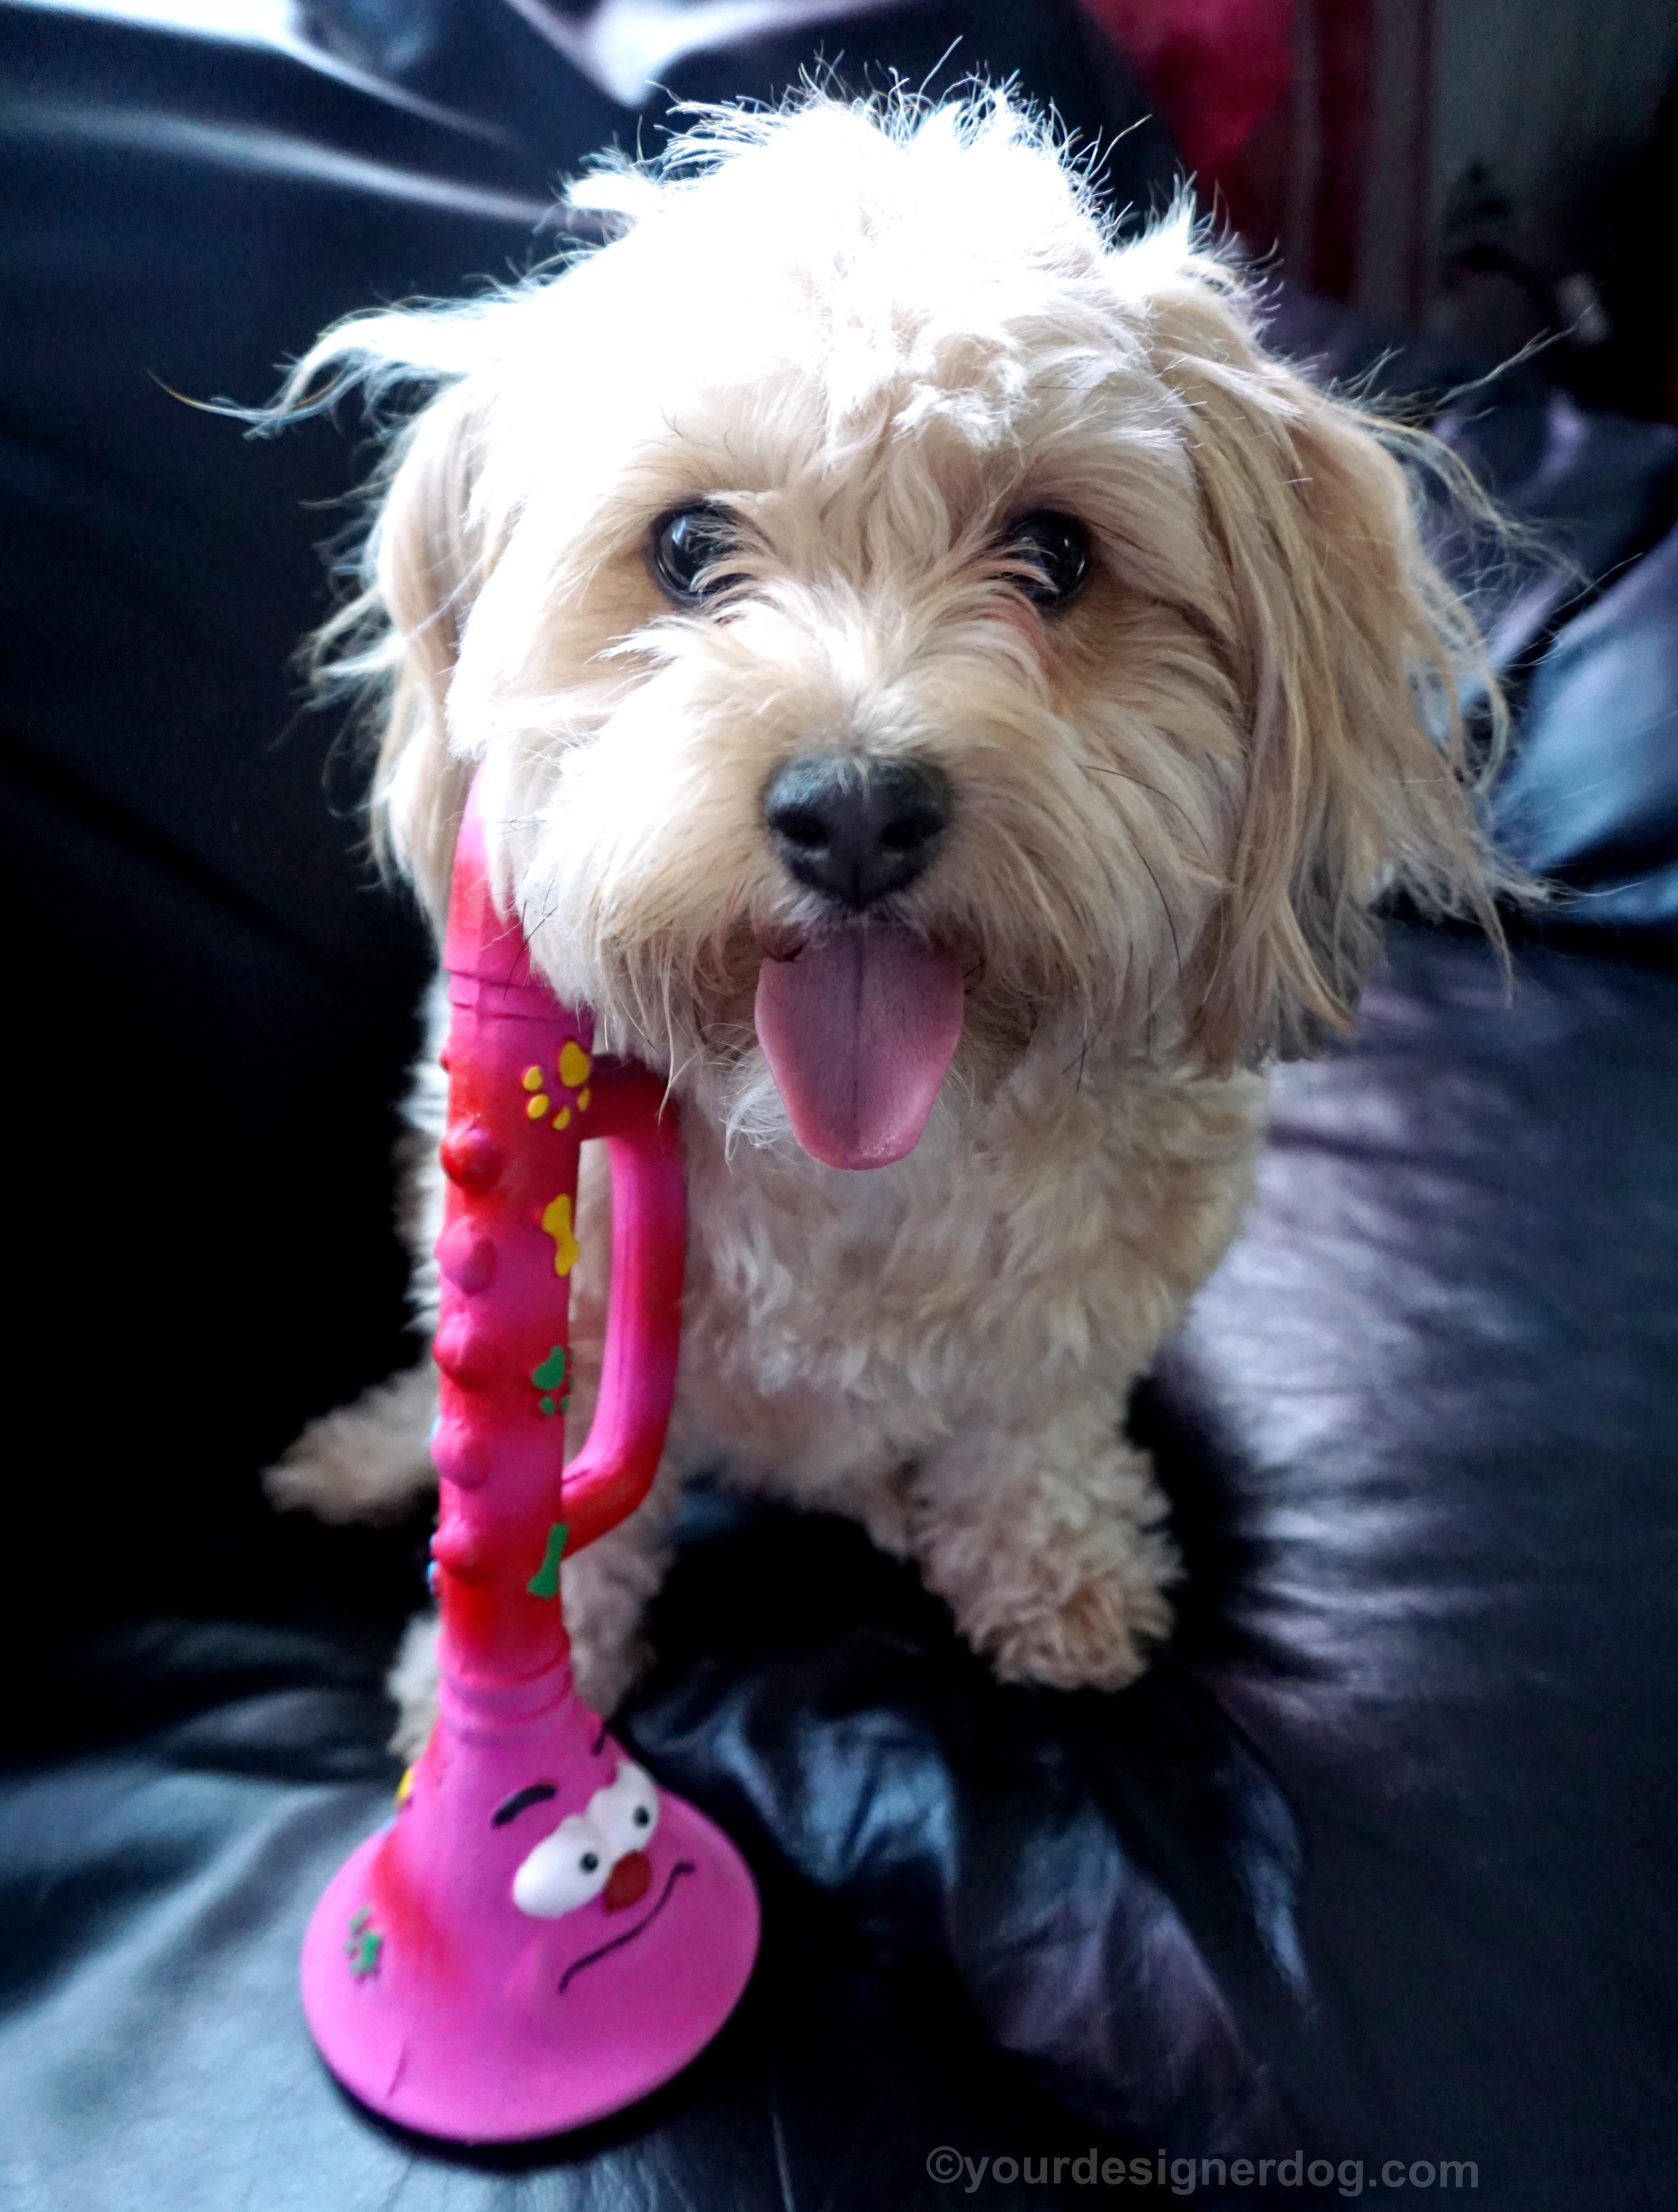 dogs, designer dogs, Yorkipoo, yorkie poo, tongue out, dog toy, squeaky toy, trumpet